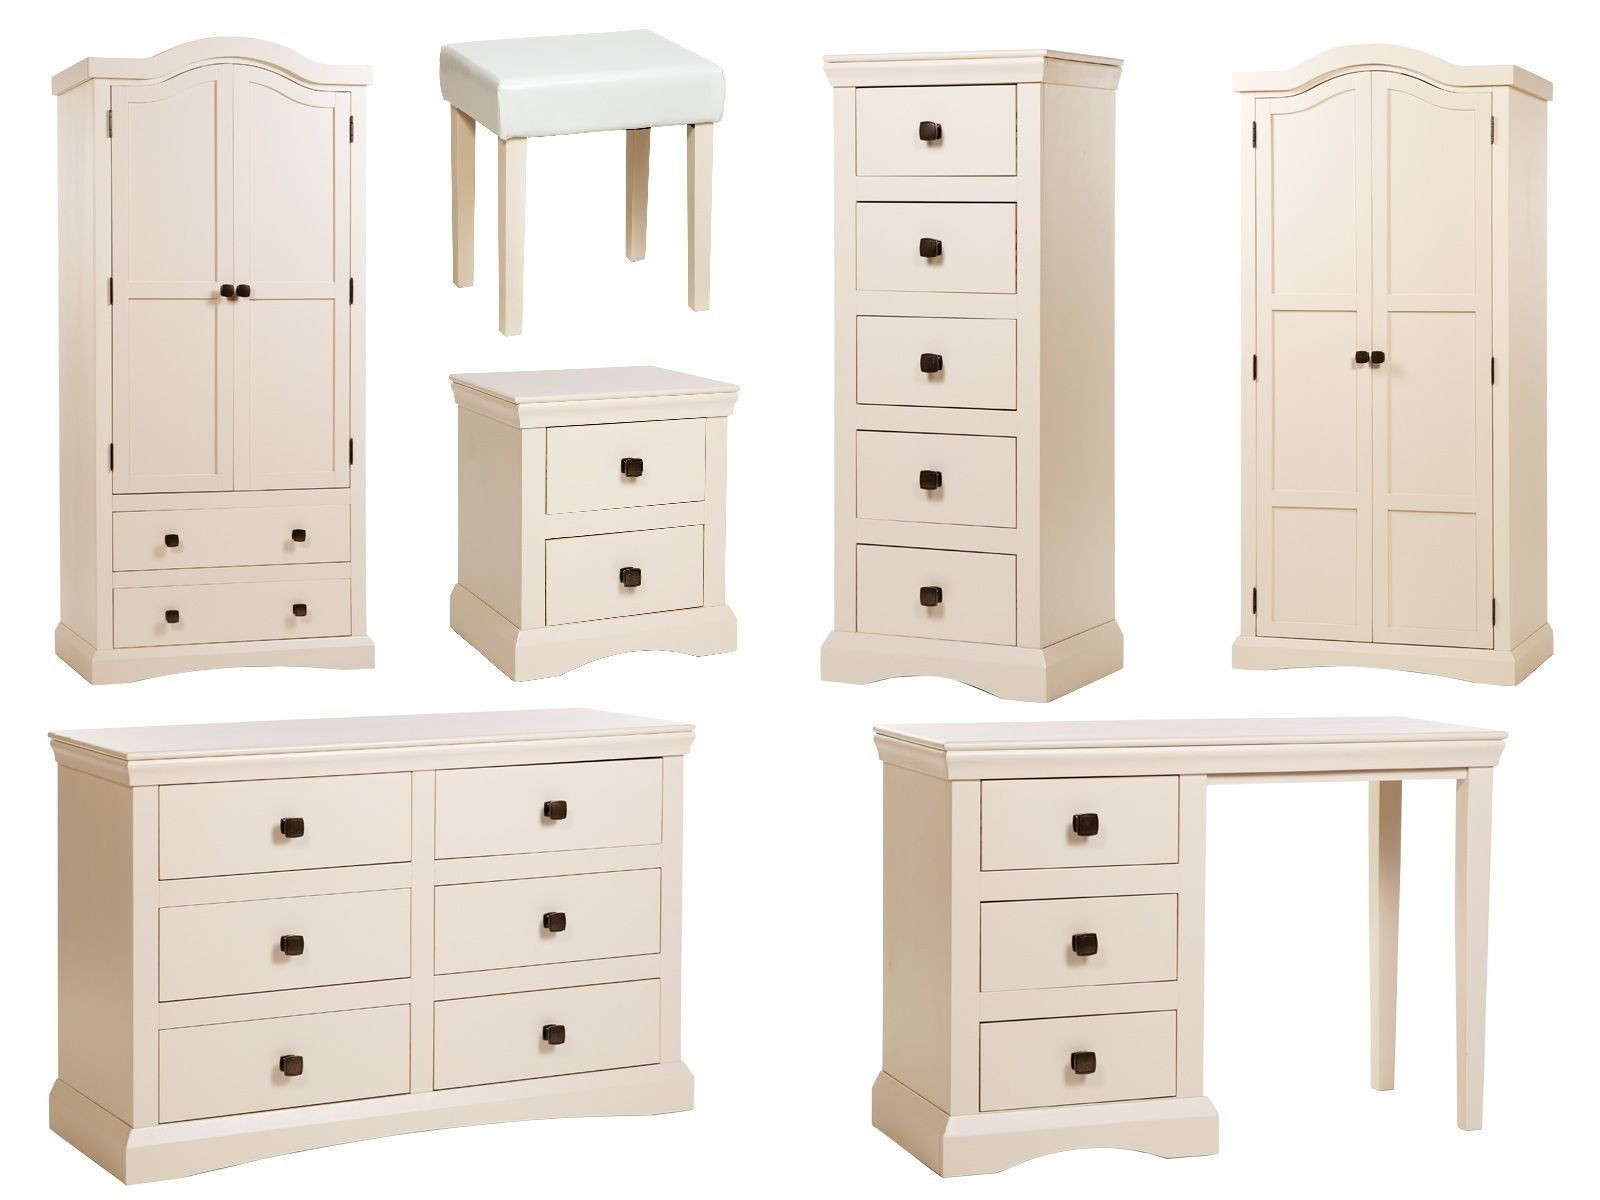 Painted Bedroom Sets
 Cream Painted Shabby Chic Wood Bedroom Furniture